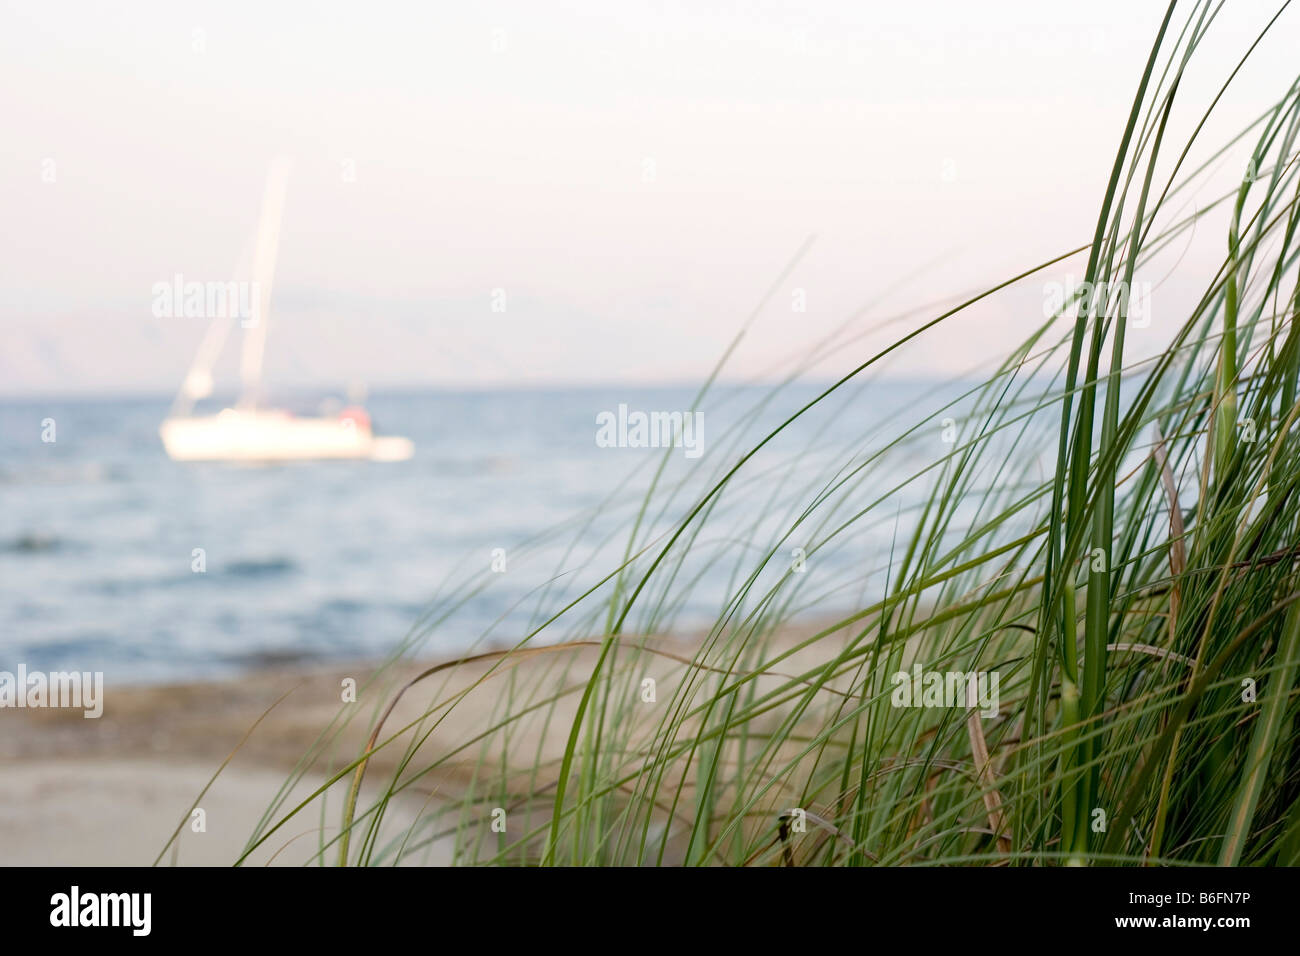 Dune grass on the beach and a yacht in the back Stock Photo